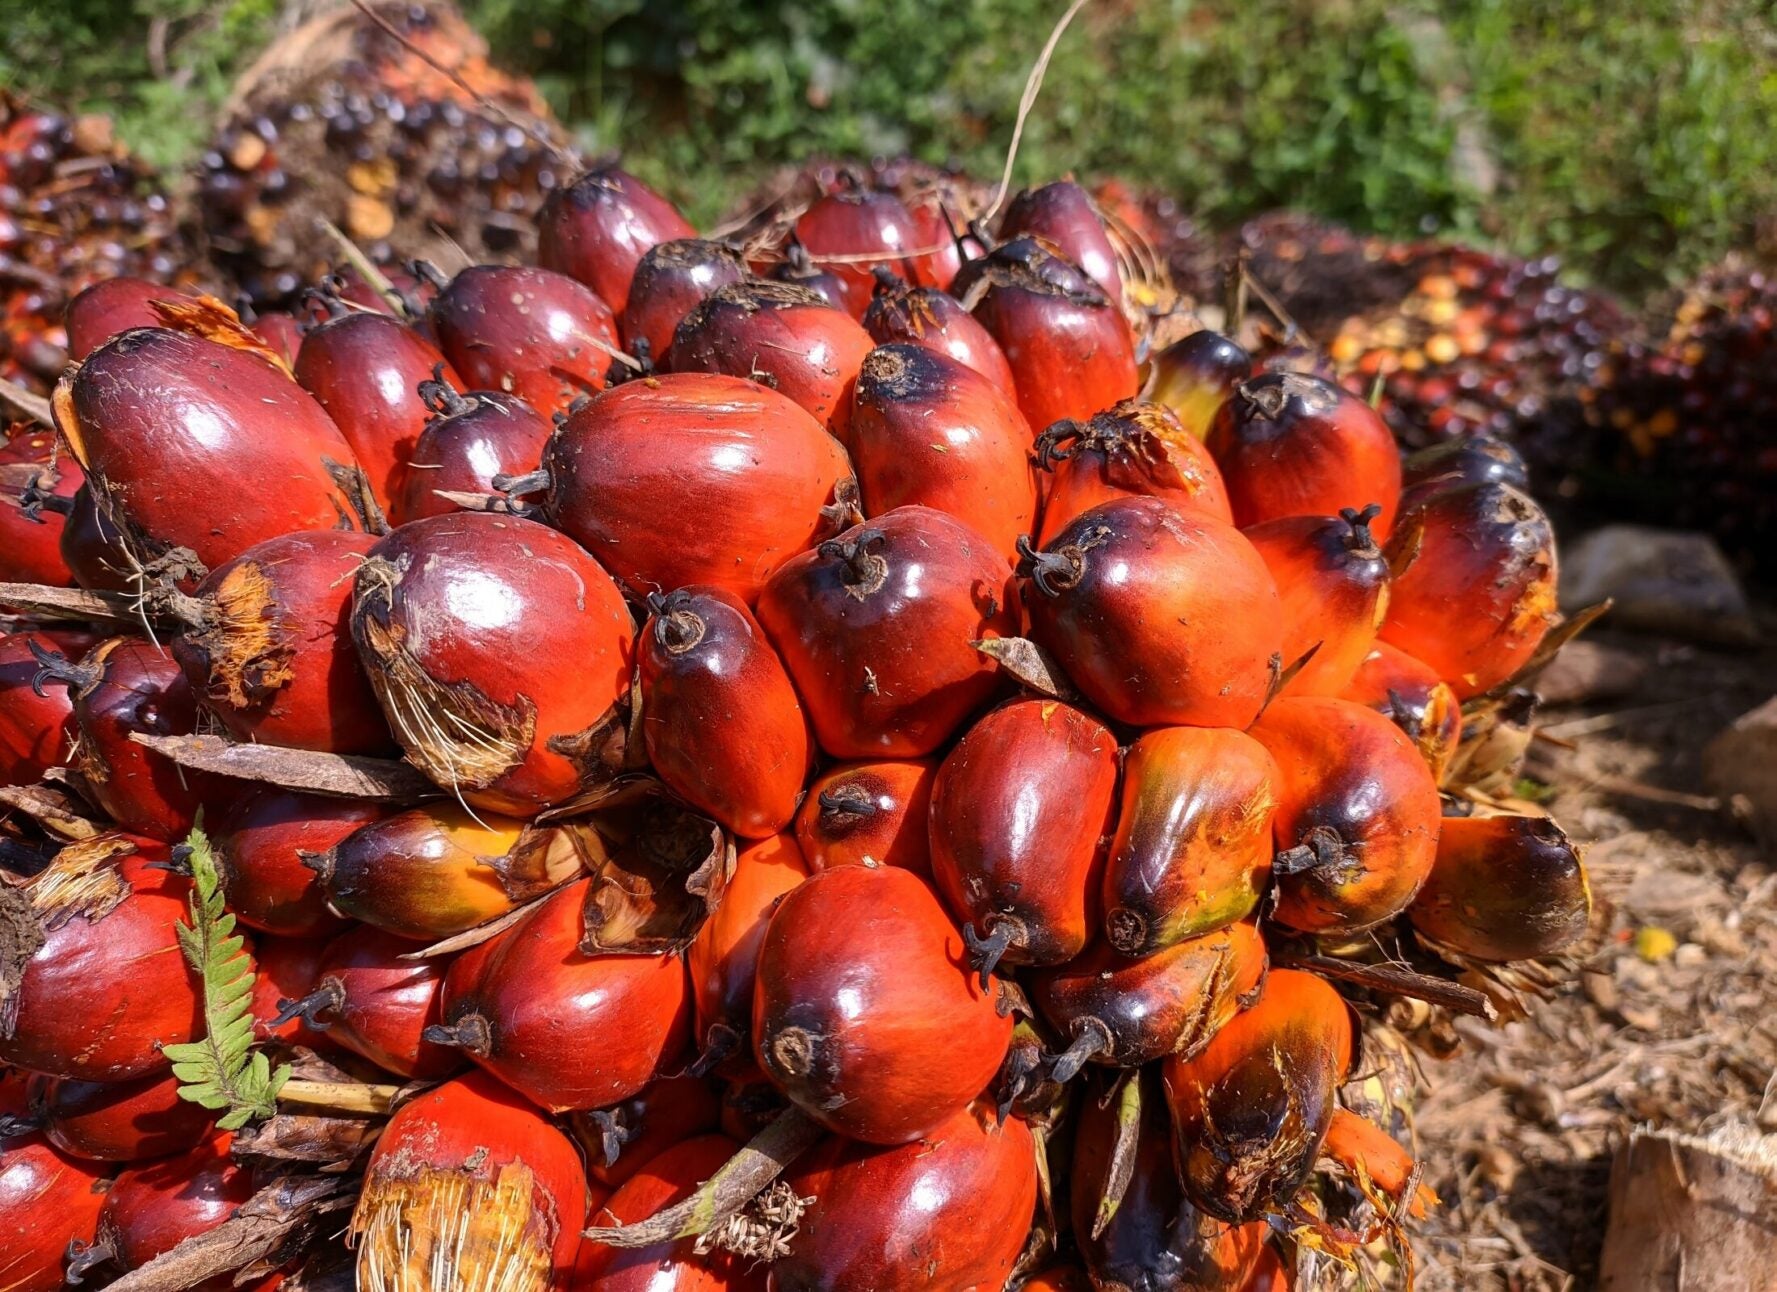 Indonesia ends palm-oil export ban